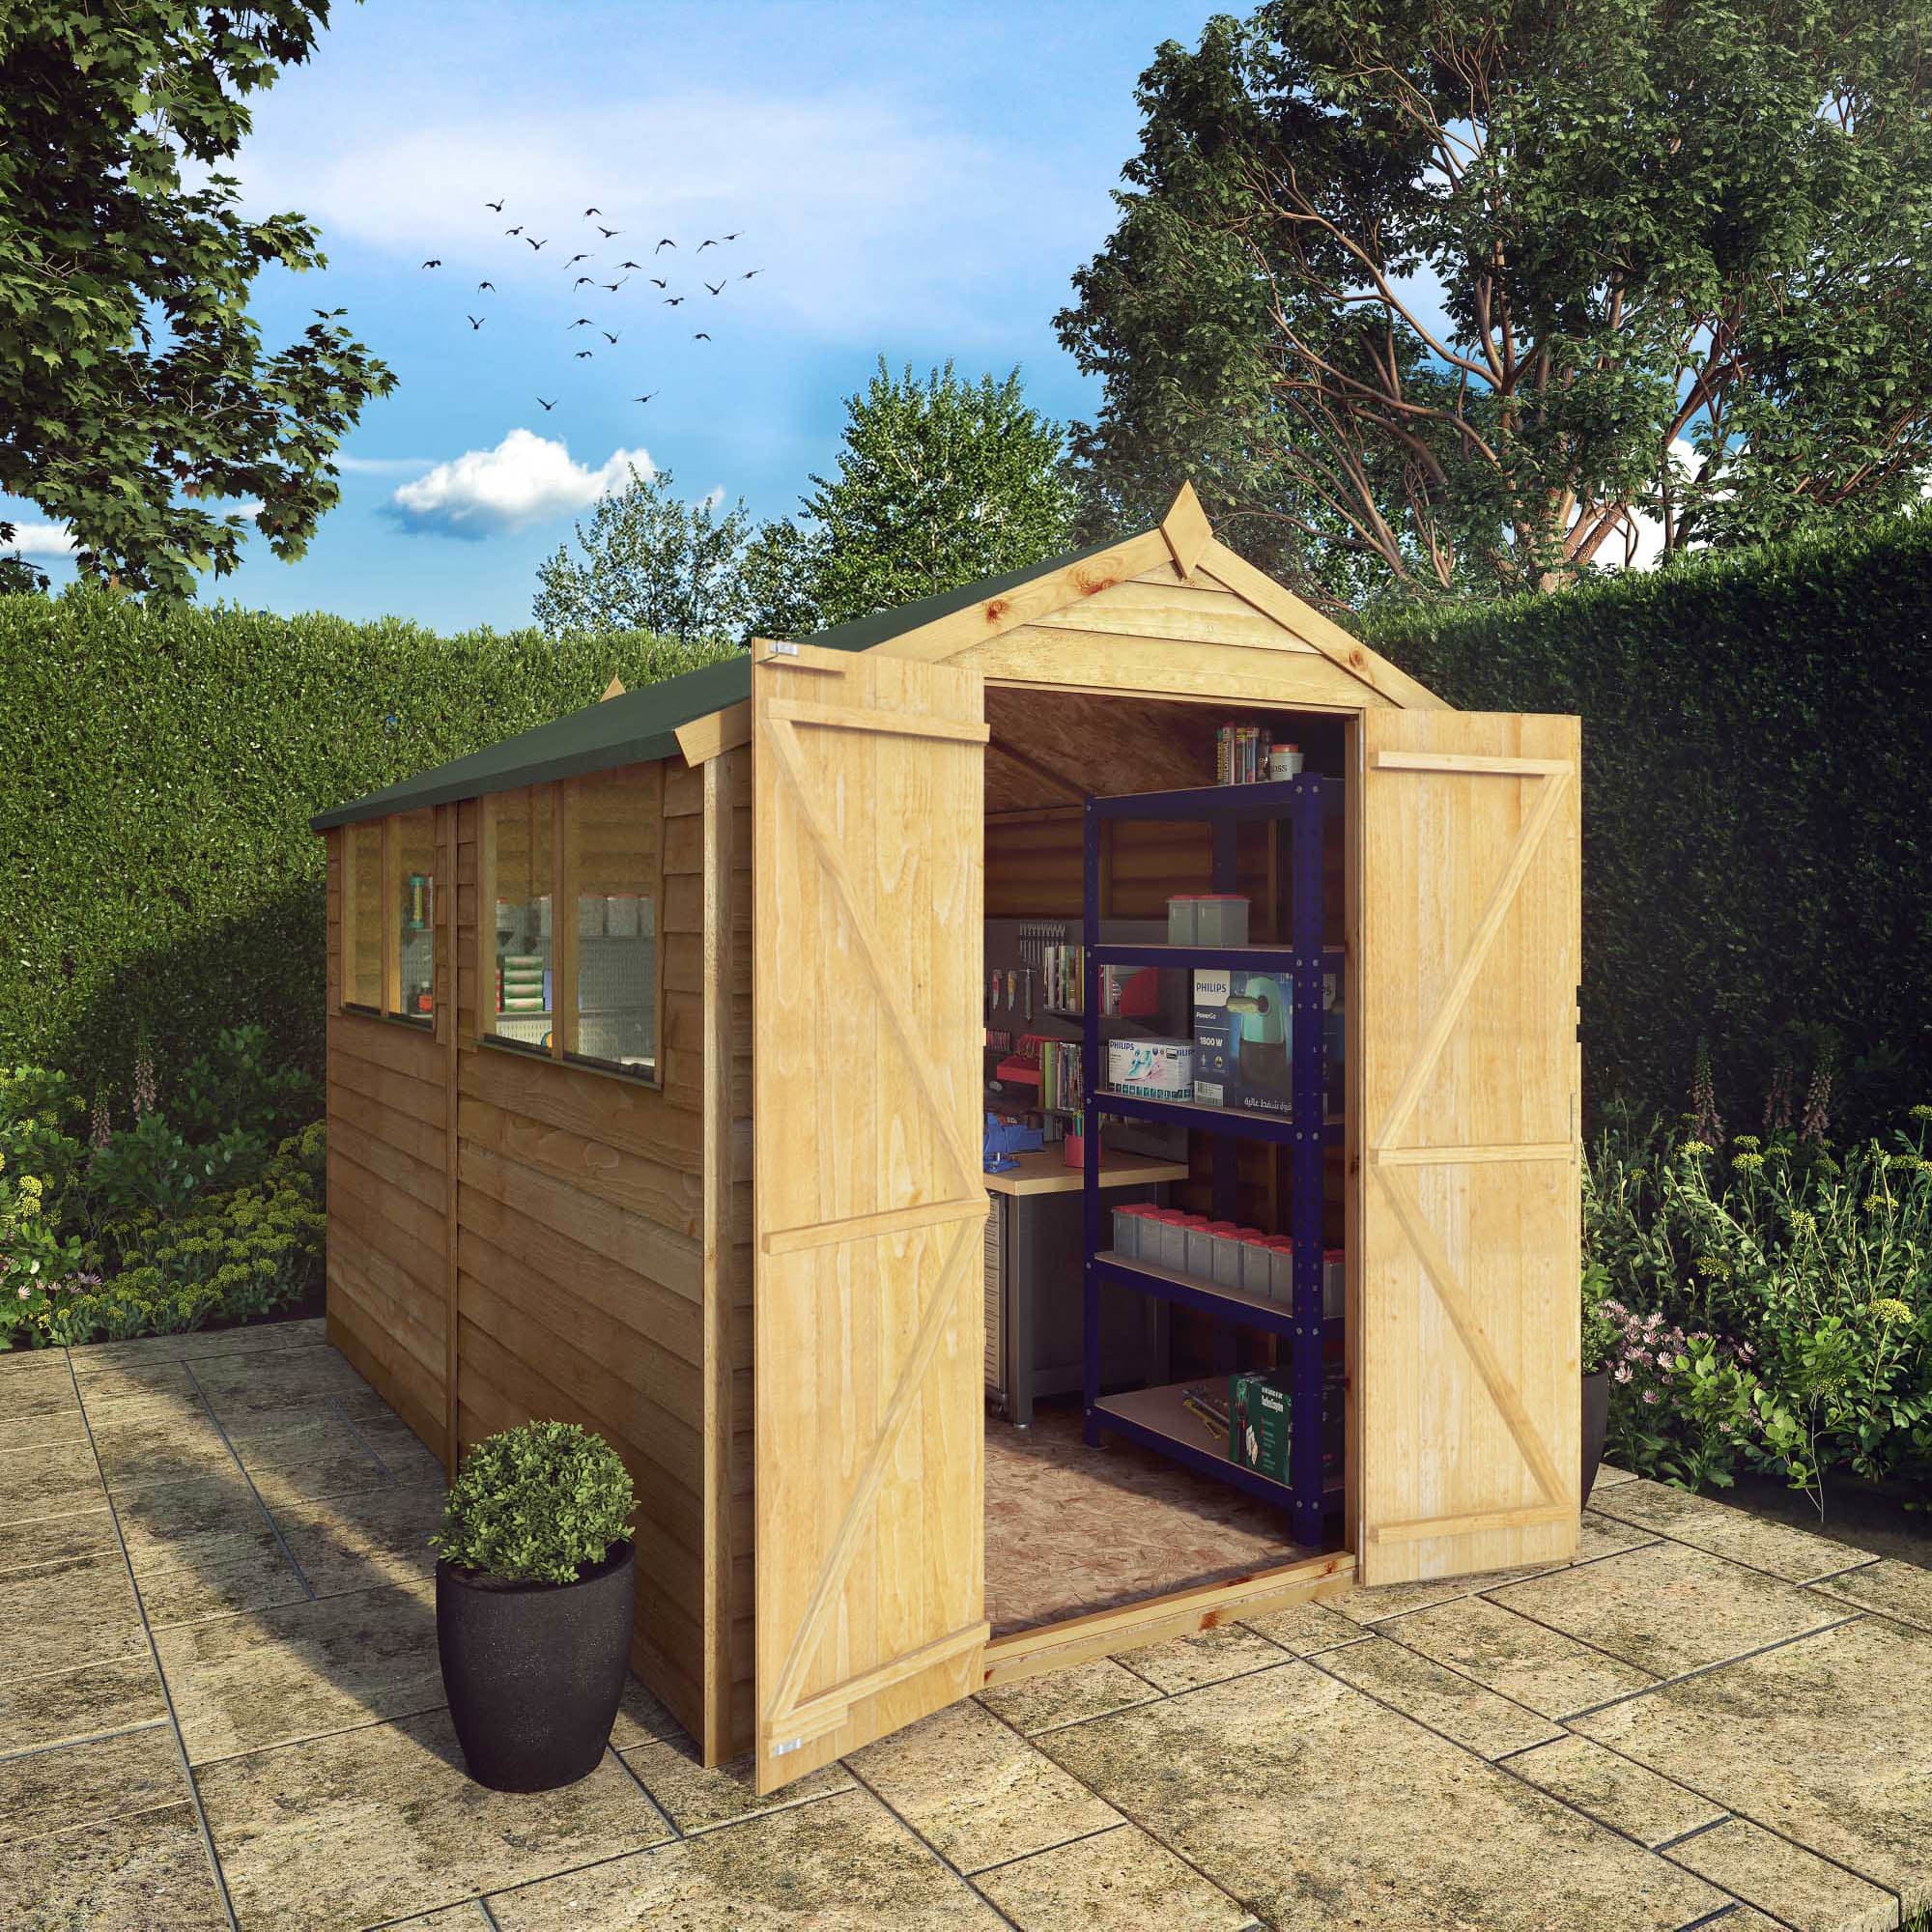 Mercia 10 x 6ft Overlap Apex Shed